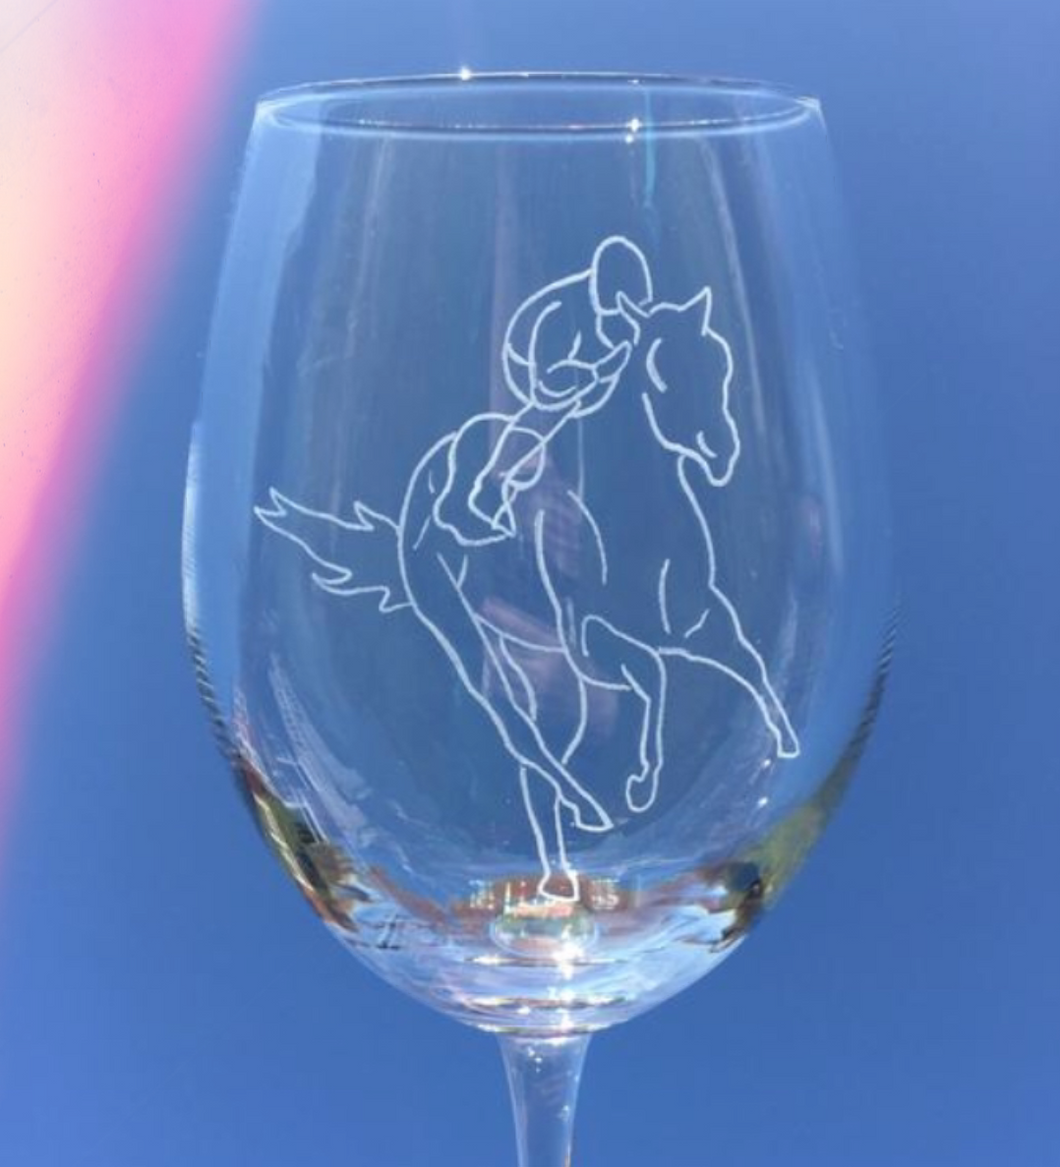 Racehorse Engraved Wine Glass